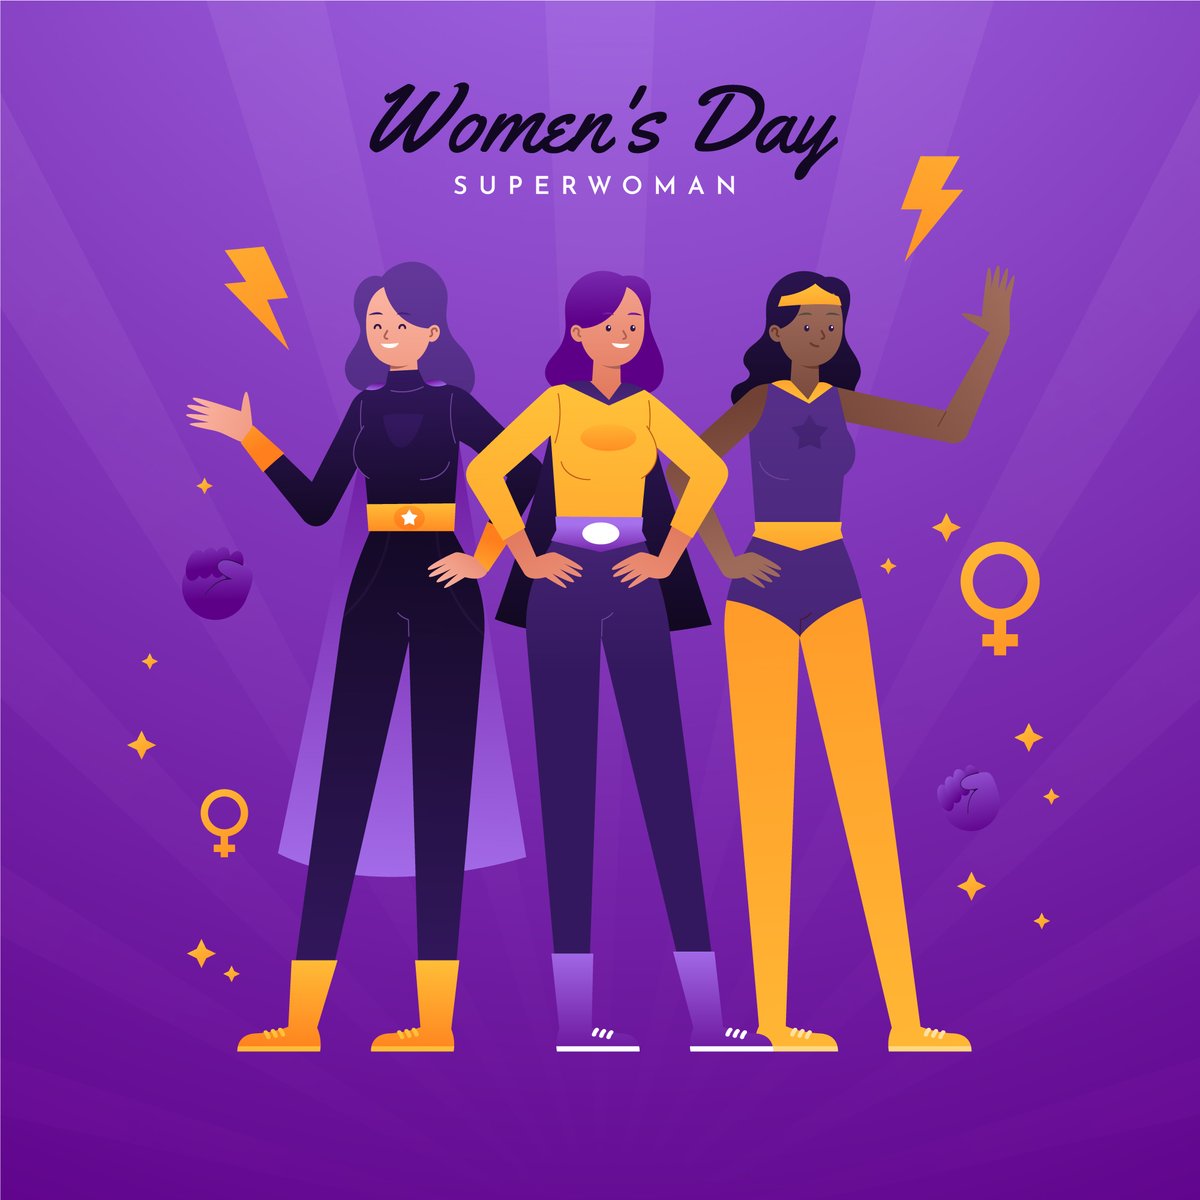 💐 On #InternationalWomensDay, we shine a light on the impact of women in #Web3 and #Crypto. Findings show a notable gender gap in leadership roles and online presence, urging a shift towards equality. At @SafeHavenio, we're proud of our female colleague spearheading…